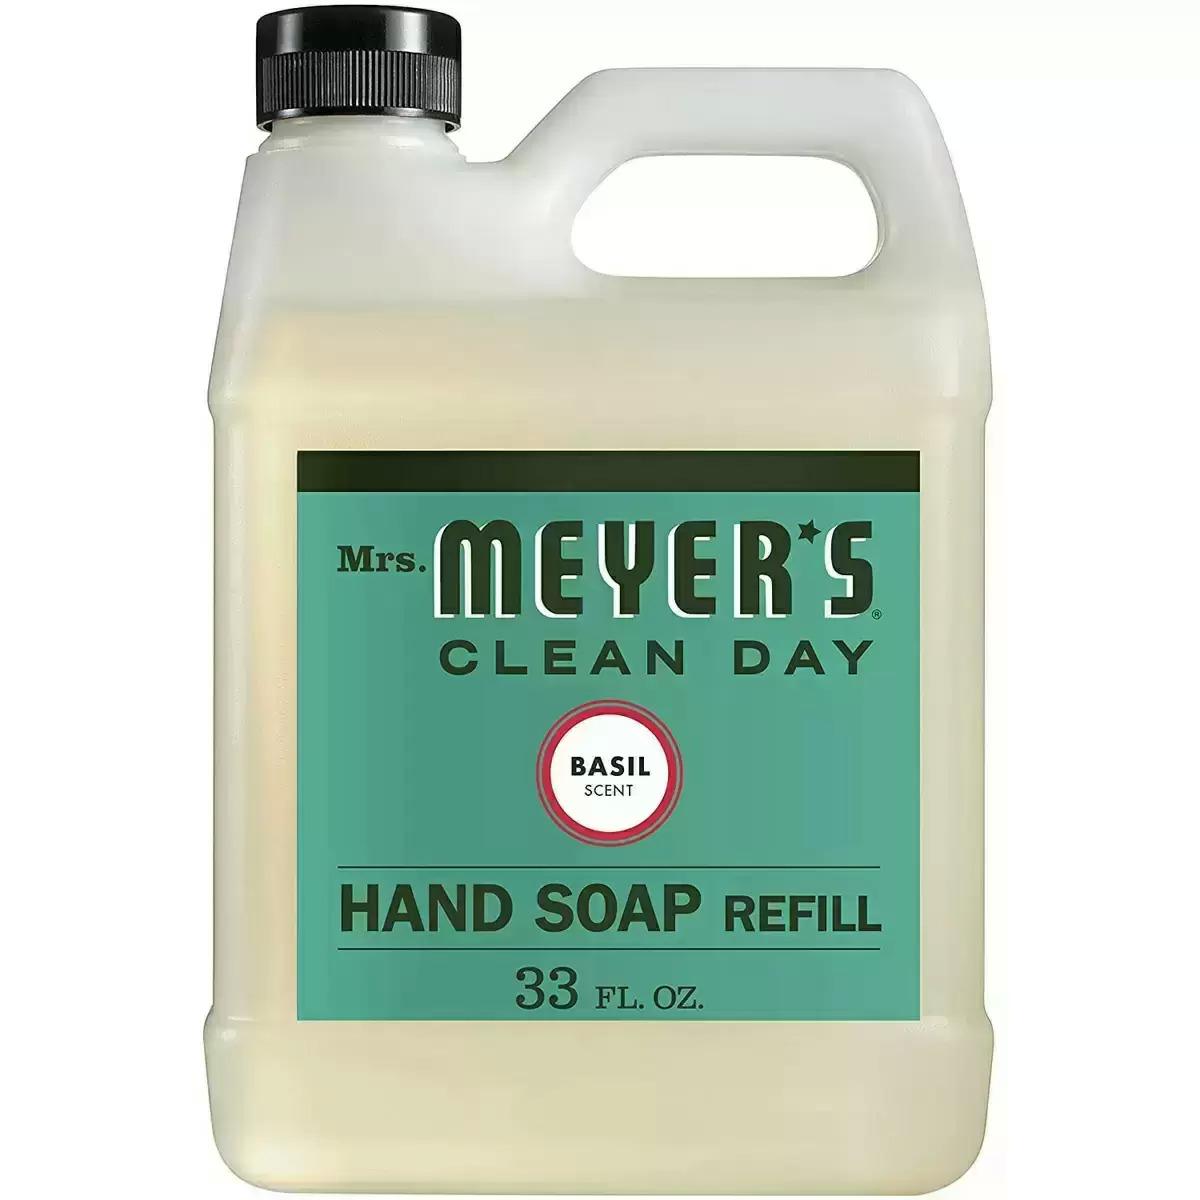 Mrs Meyers Clean Day Liquid Hand Soap Refill for $4.89 Shipped